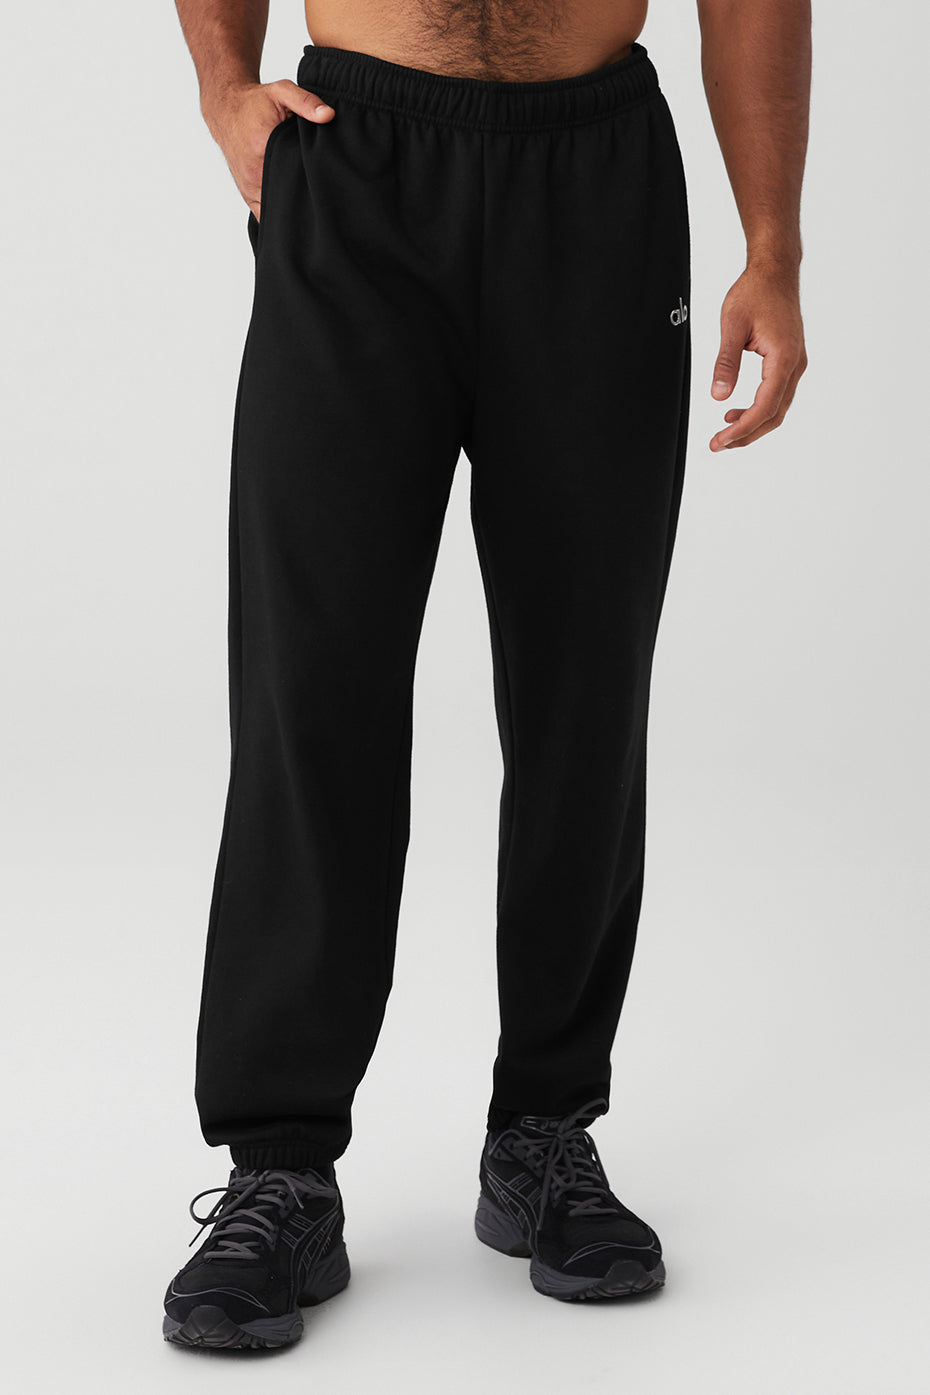 Buy Alo Accolade Sweatpants - White At 30% Off